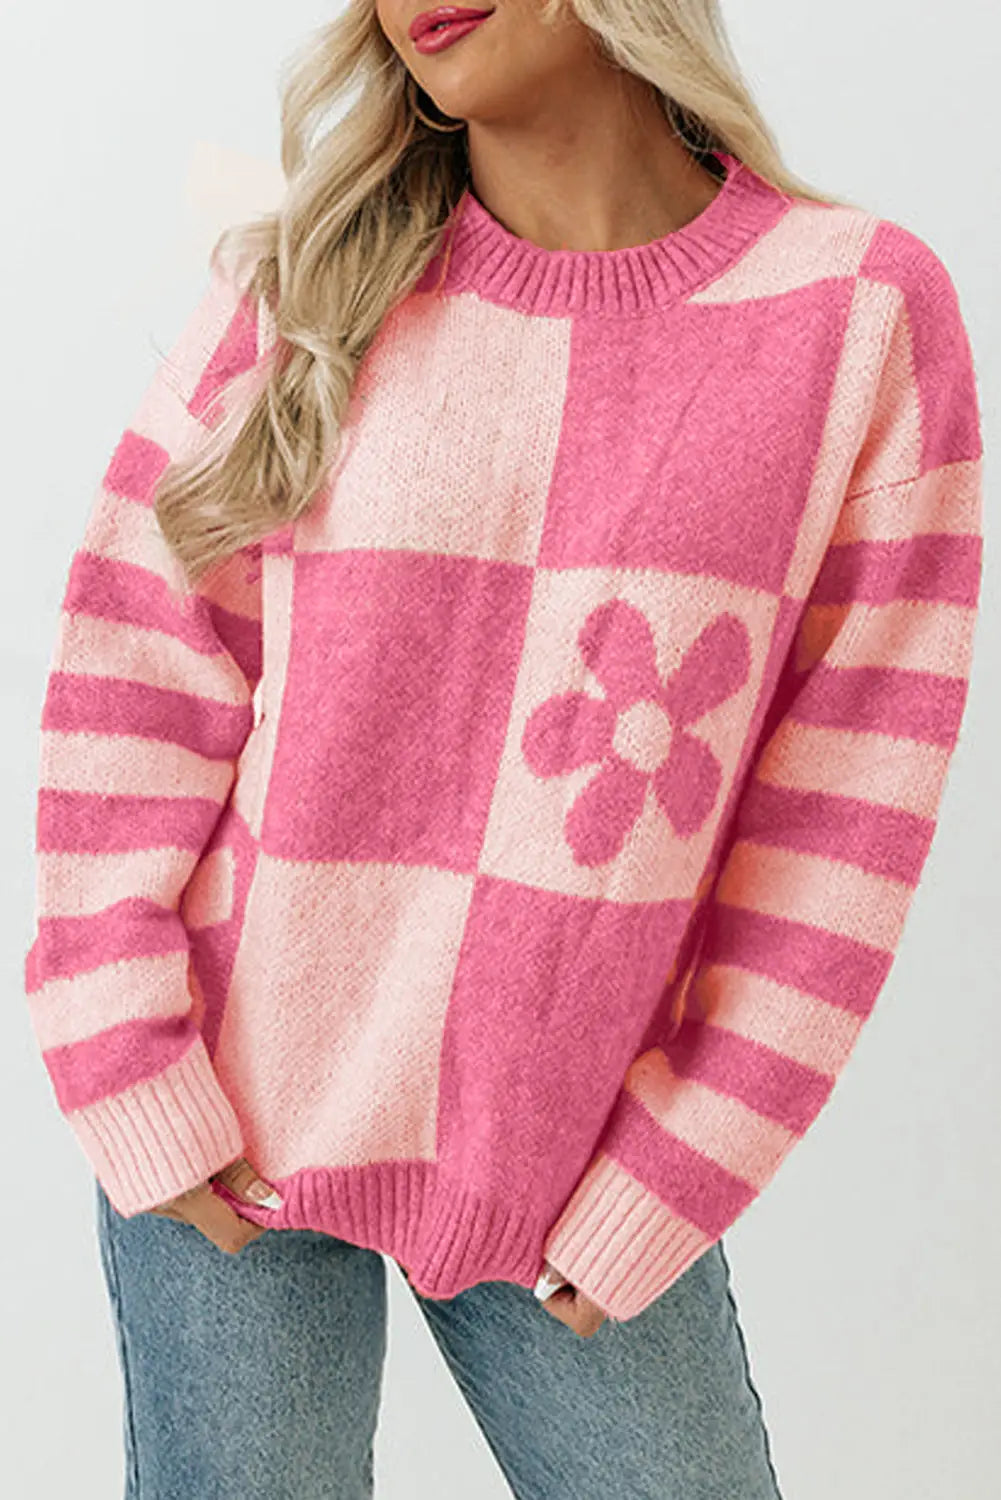 Brown checkered floral print striped sleeve sweater - strawberry pink / s / 100% polyester - tops